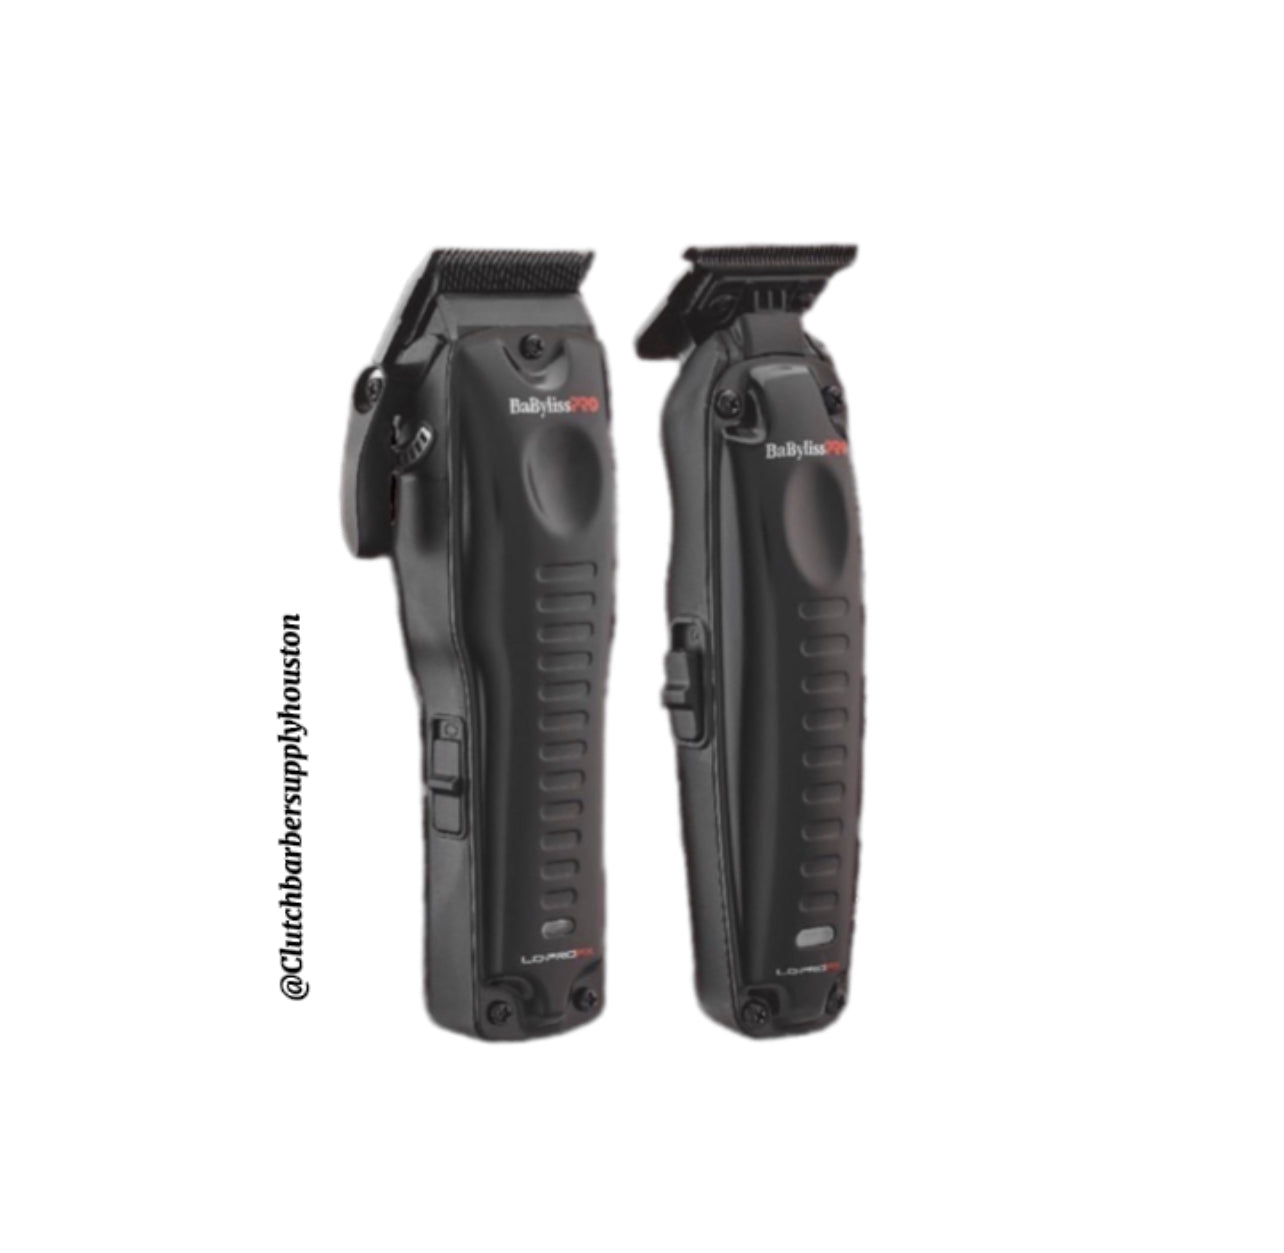 Babyliss Lo-ProFX Clipper & Trimmer